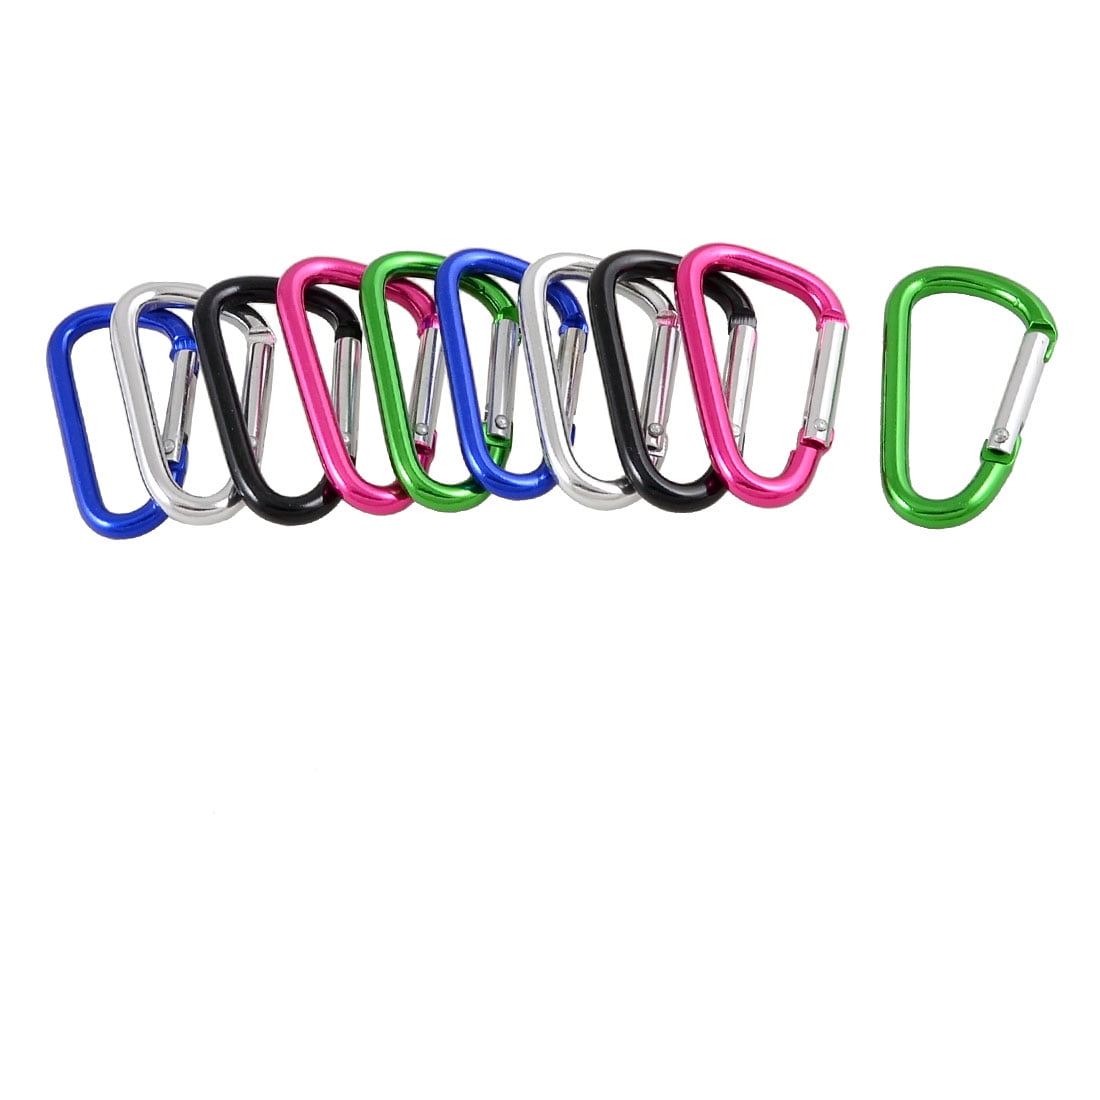 10Pack 5.5 inch Spring Snap Hooks, Heavy Duty Carabiner Clips for Swing, 12mm 1/2” Quick Chain Link Buckle Clip Keychain Carabiners for Hammock